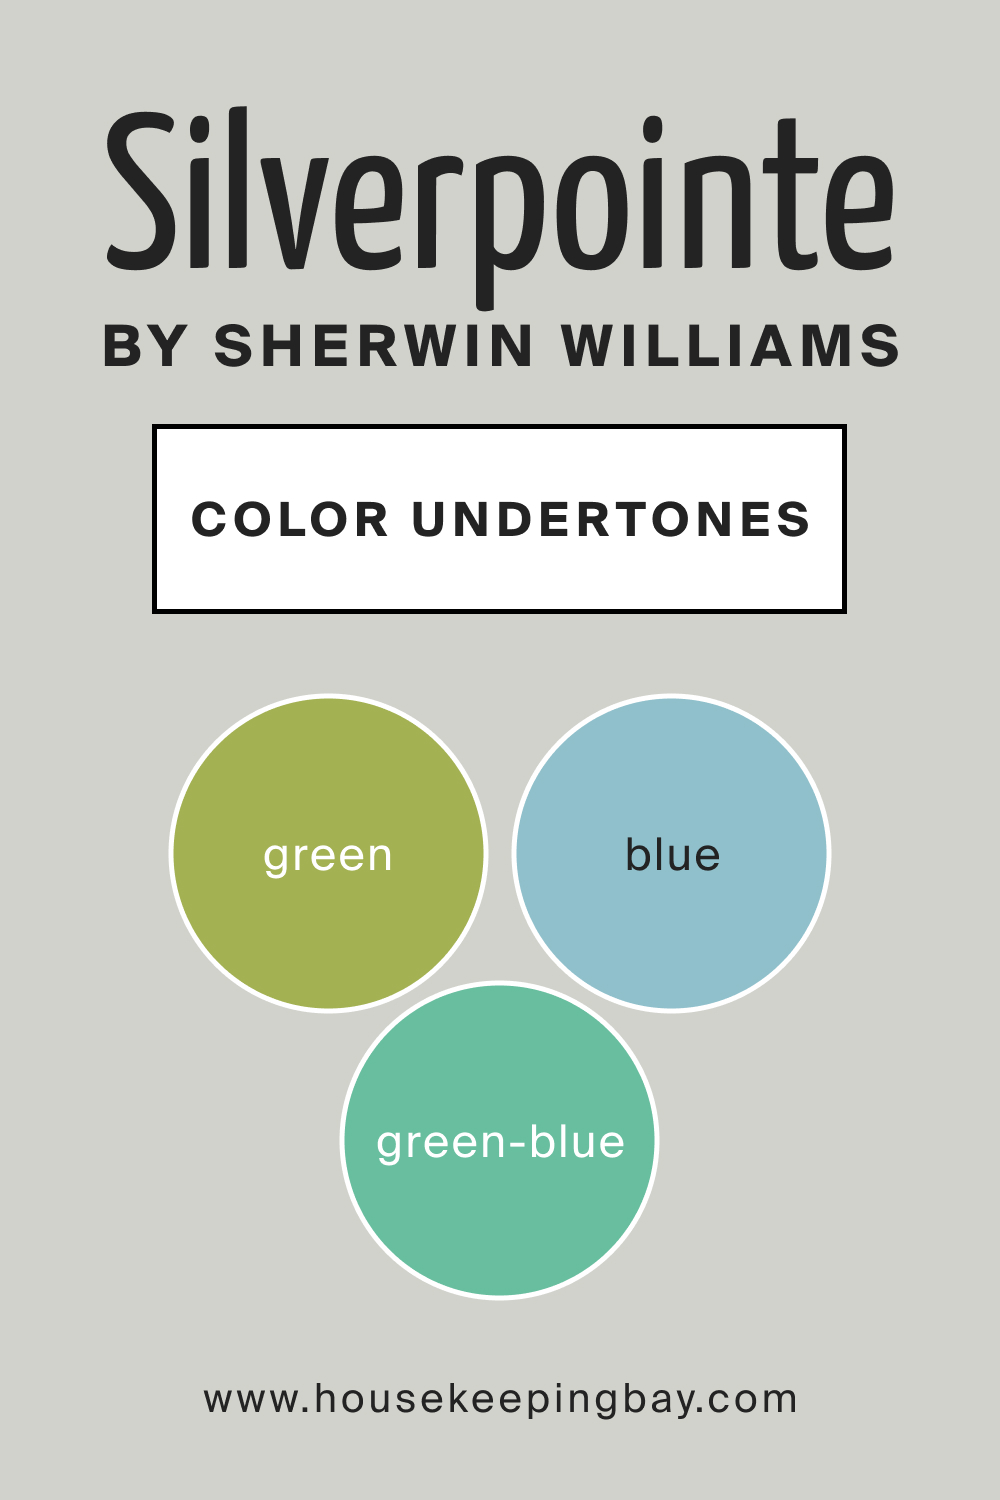 SW Silverpointe by Sherwin Williams Main Color Undertone